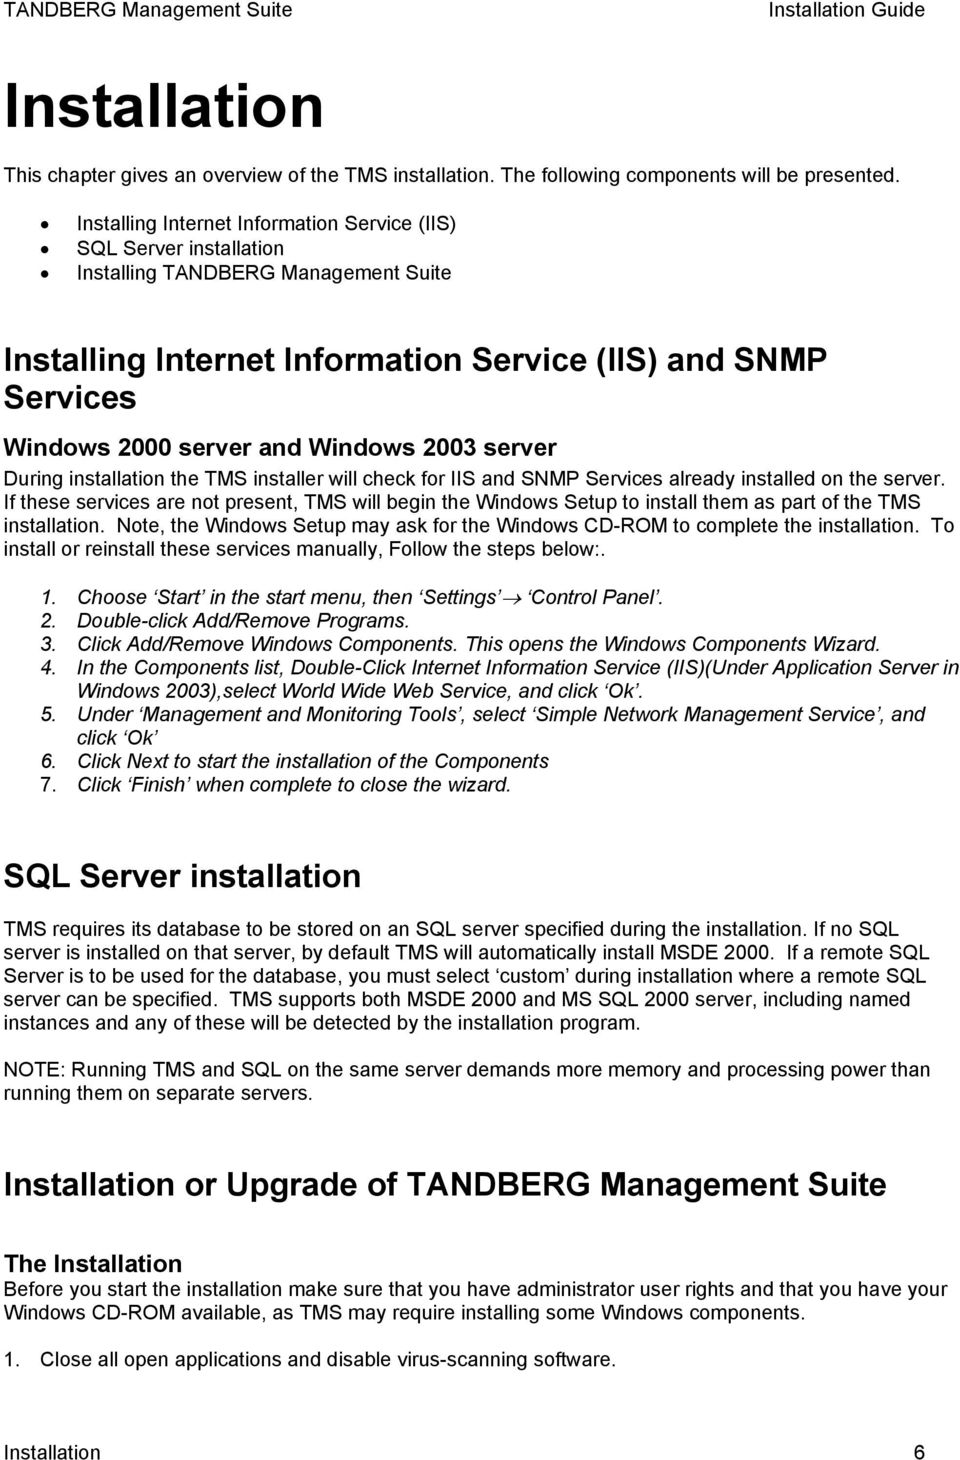 Windows 2003 server During installation the TMS installer will check for IIS and SNMP Services already installed on the server.